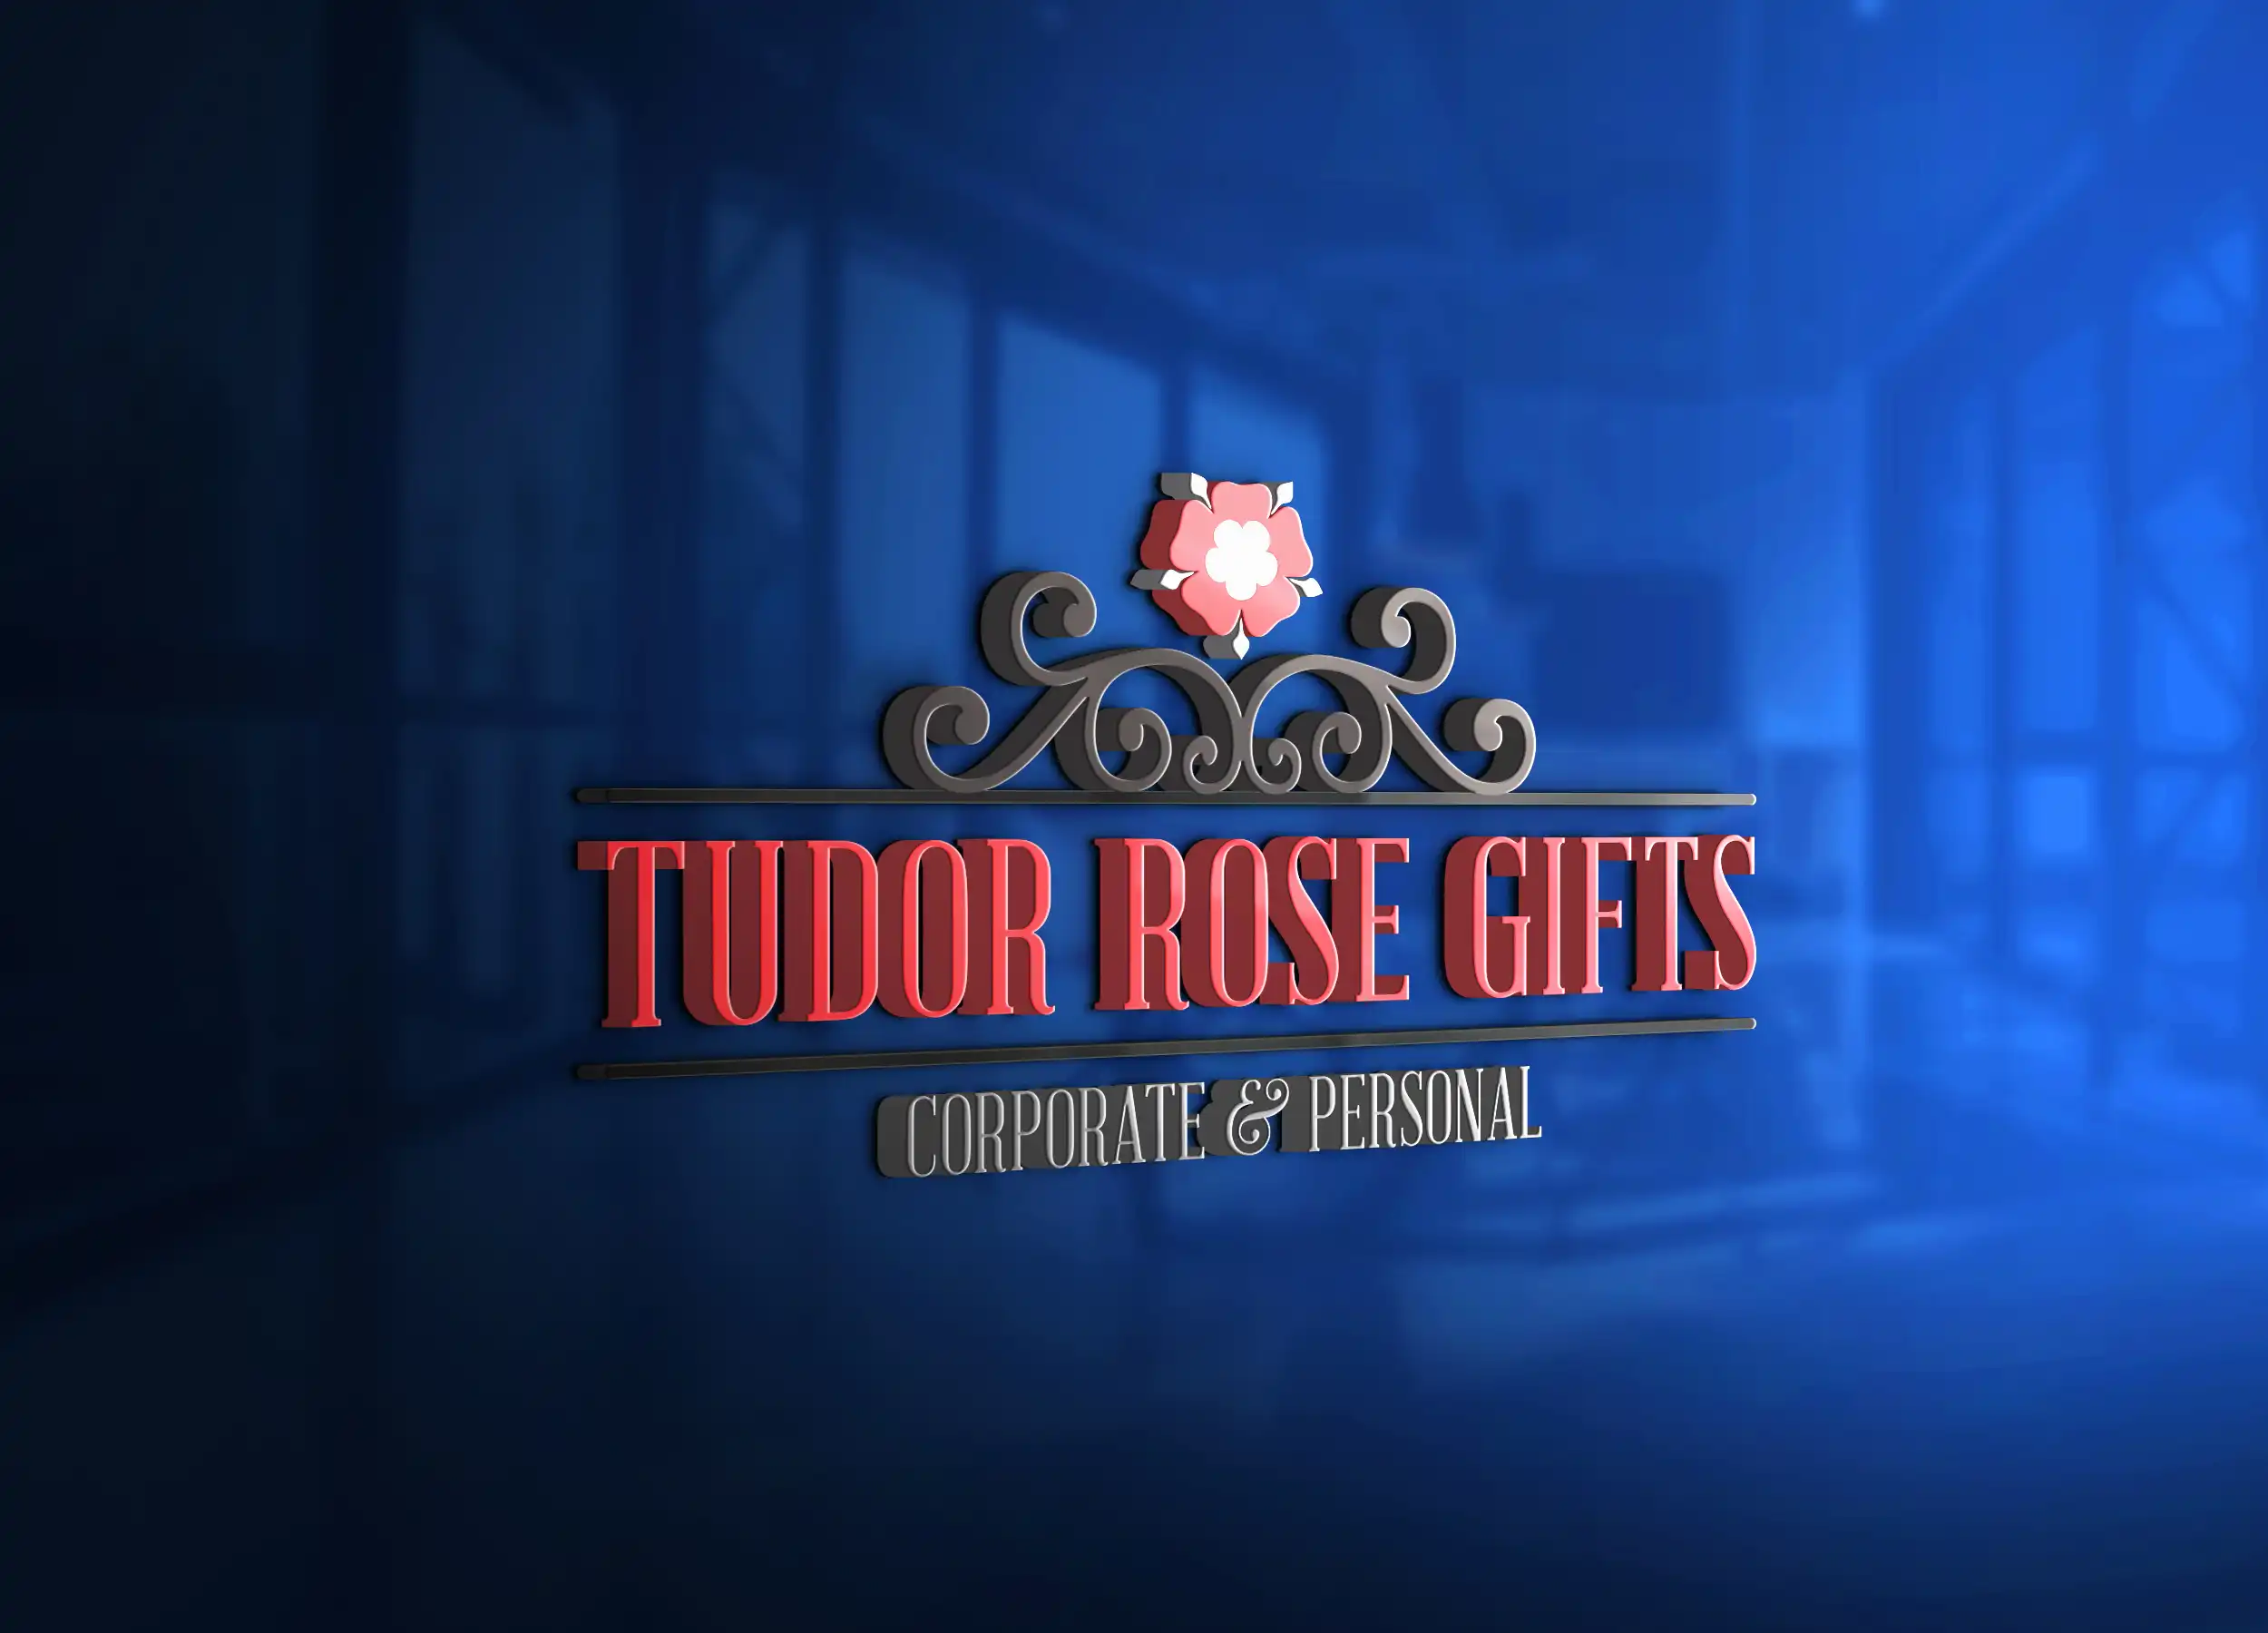 Logo Making made easy for Tudor Rose Gifts in Coalgate, Selwyn, Christchurch, Canterbury, NZ. A formal, wrought iron styled Logo Design made by XDC.NZ, the super experienced, professional, specialist Logo Maker based in Rolleston Selwyn NZ